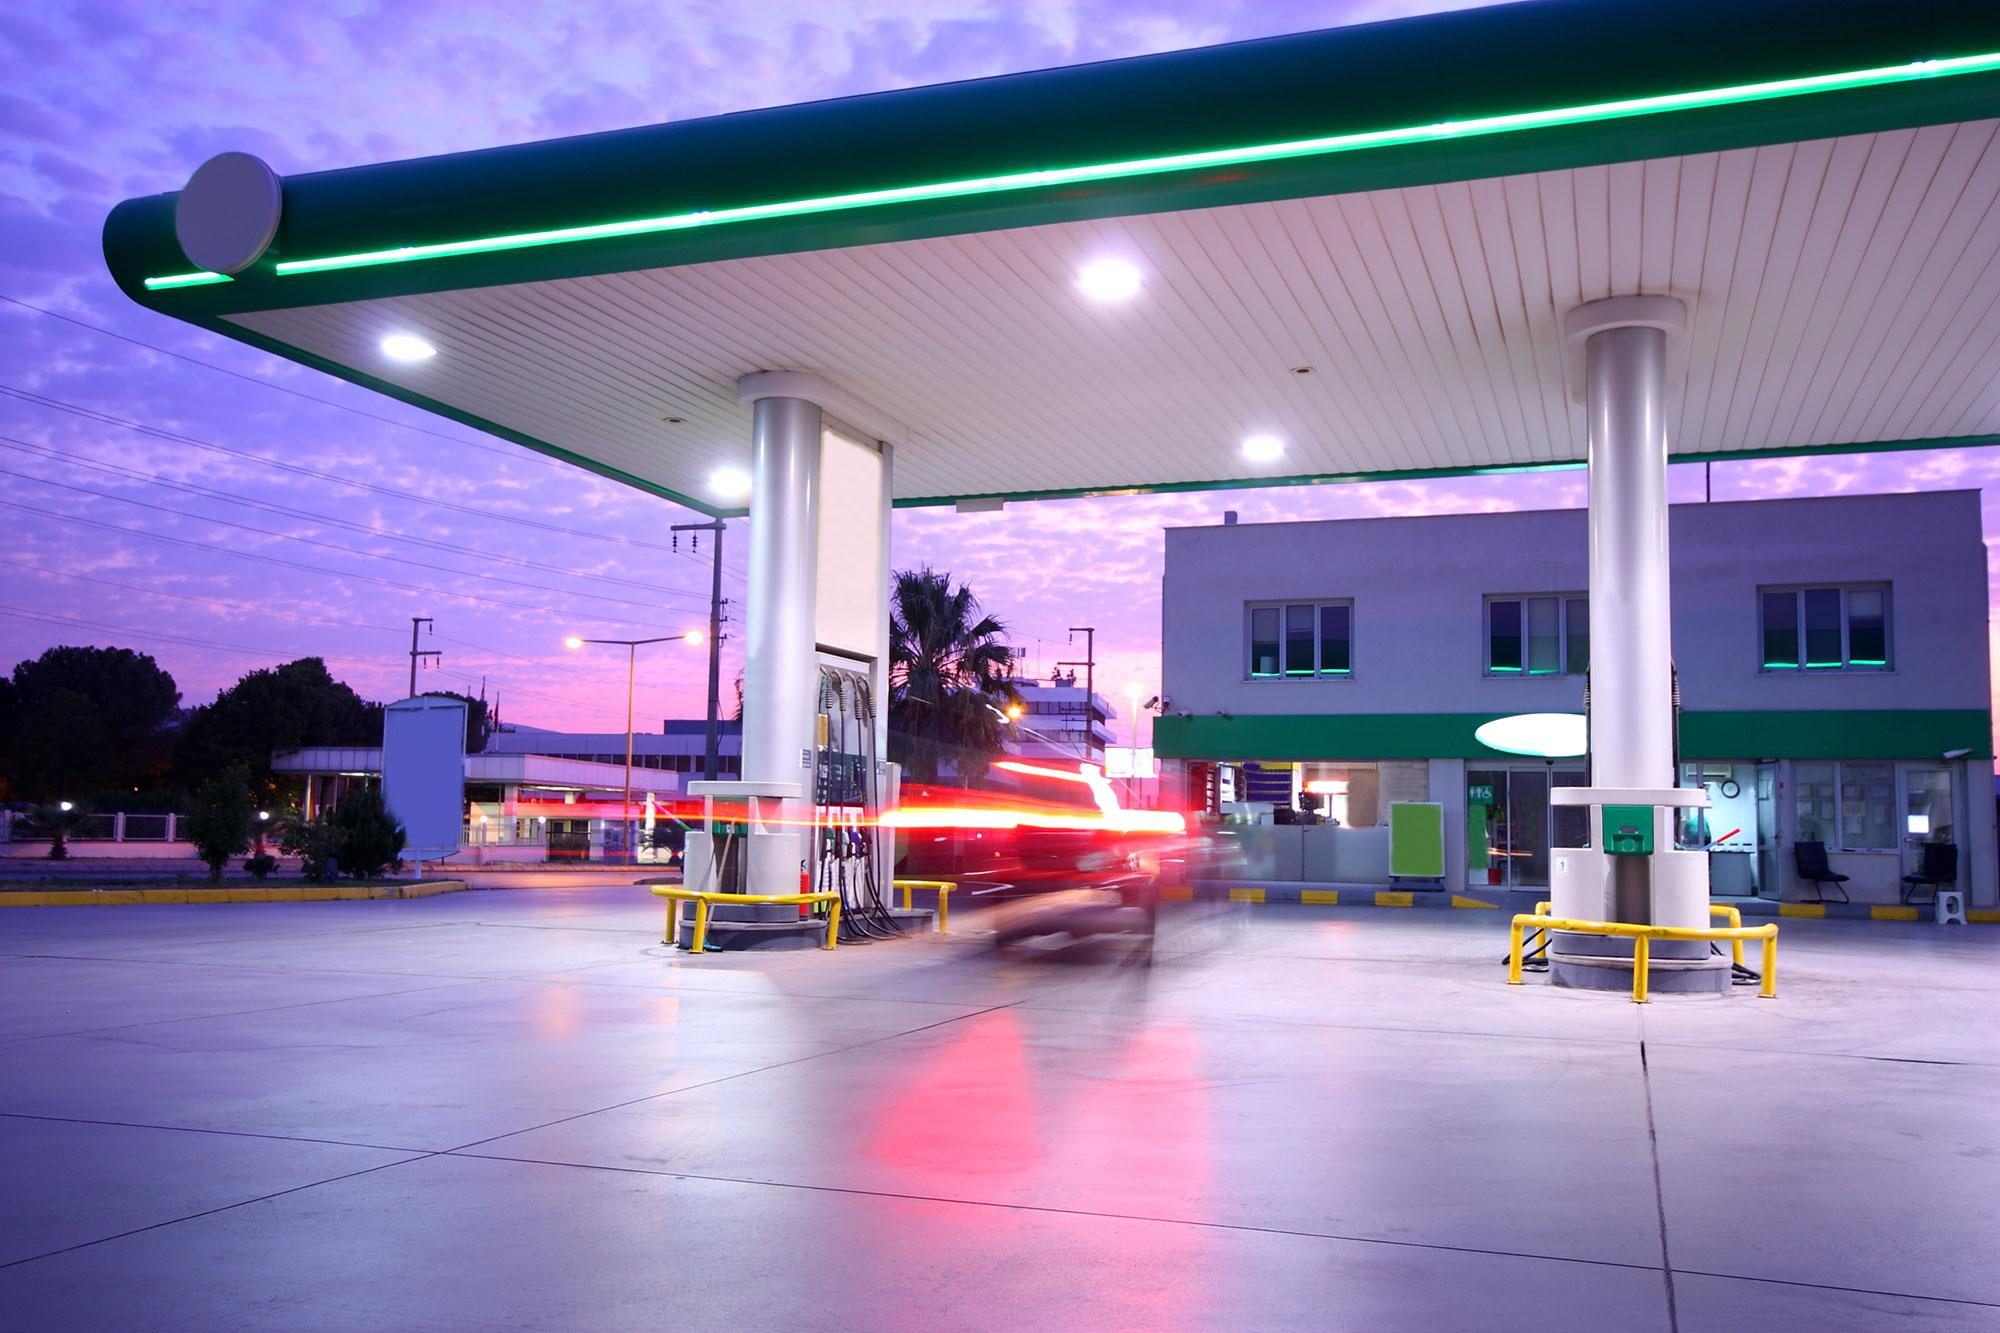 Gas station enhanced by smart technology